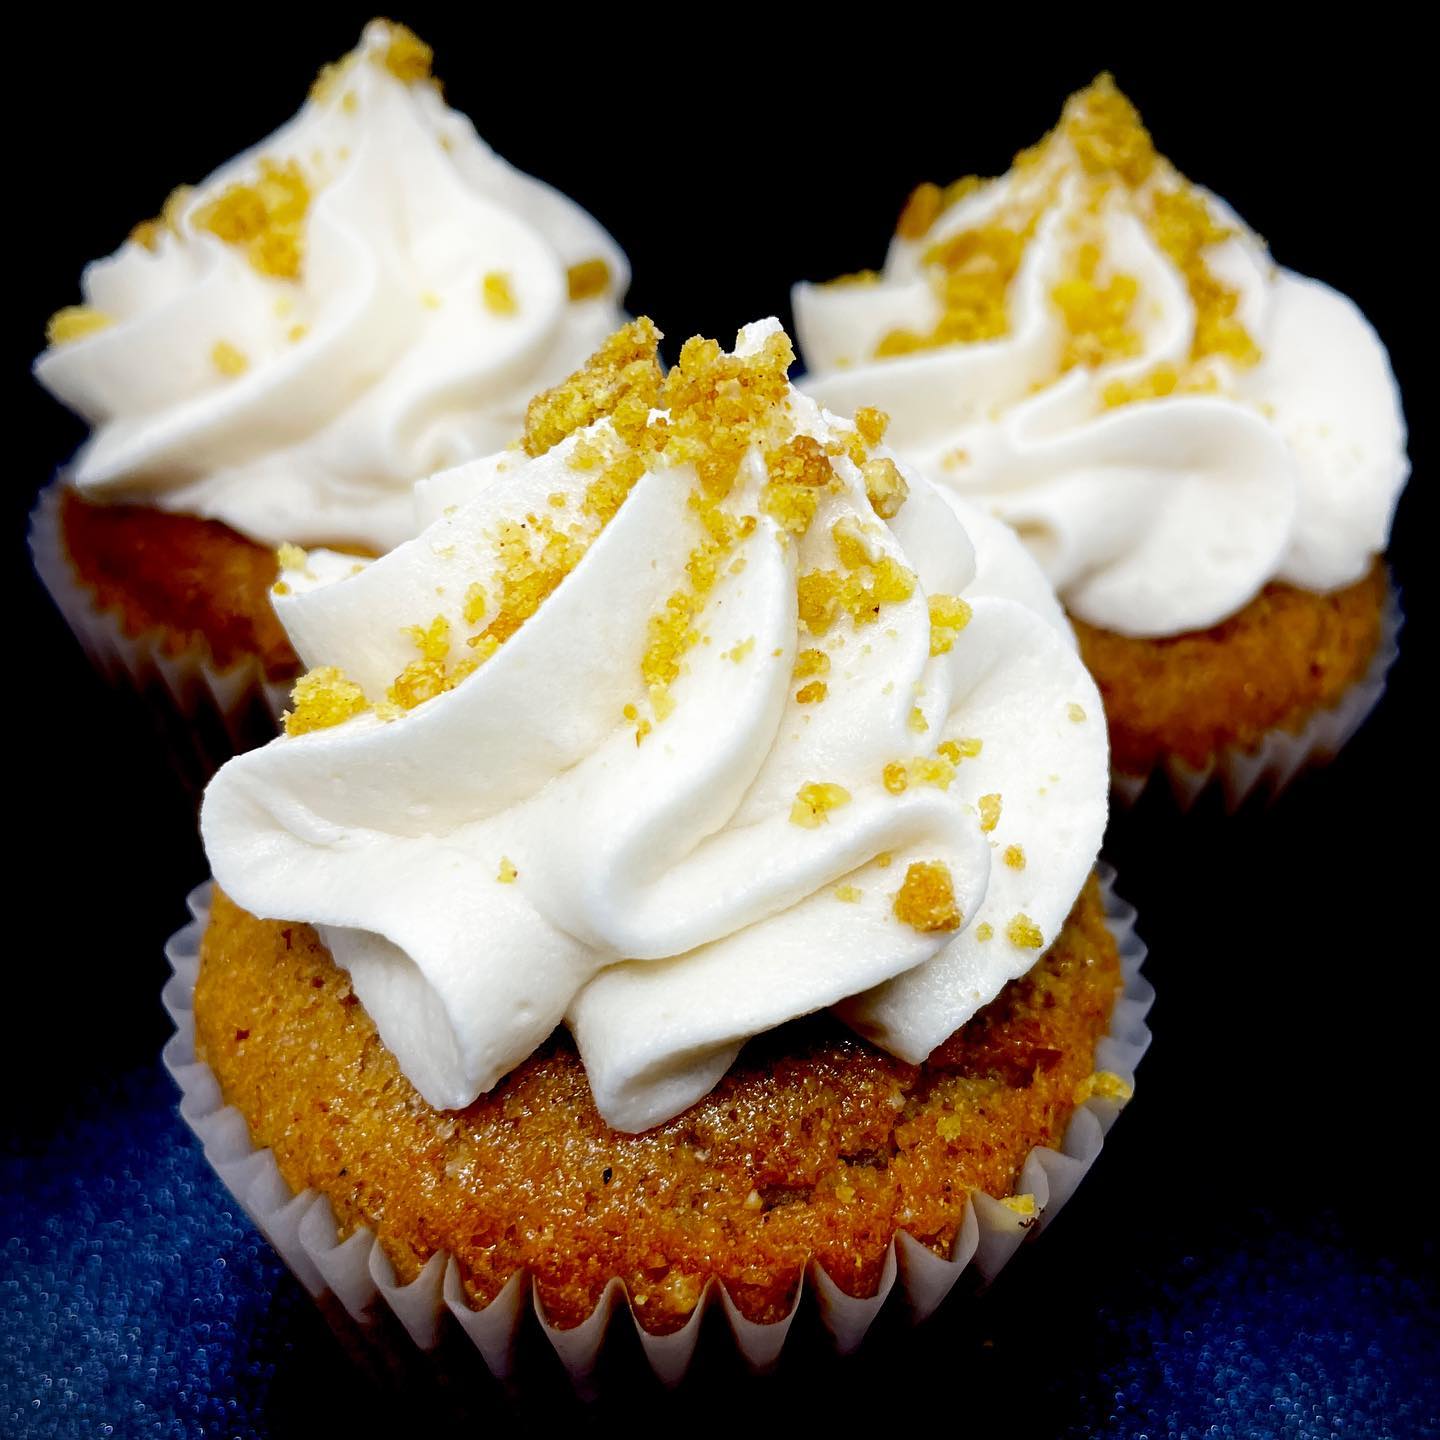 Three brown cupcakes with white frosting and yellow crumbles.